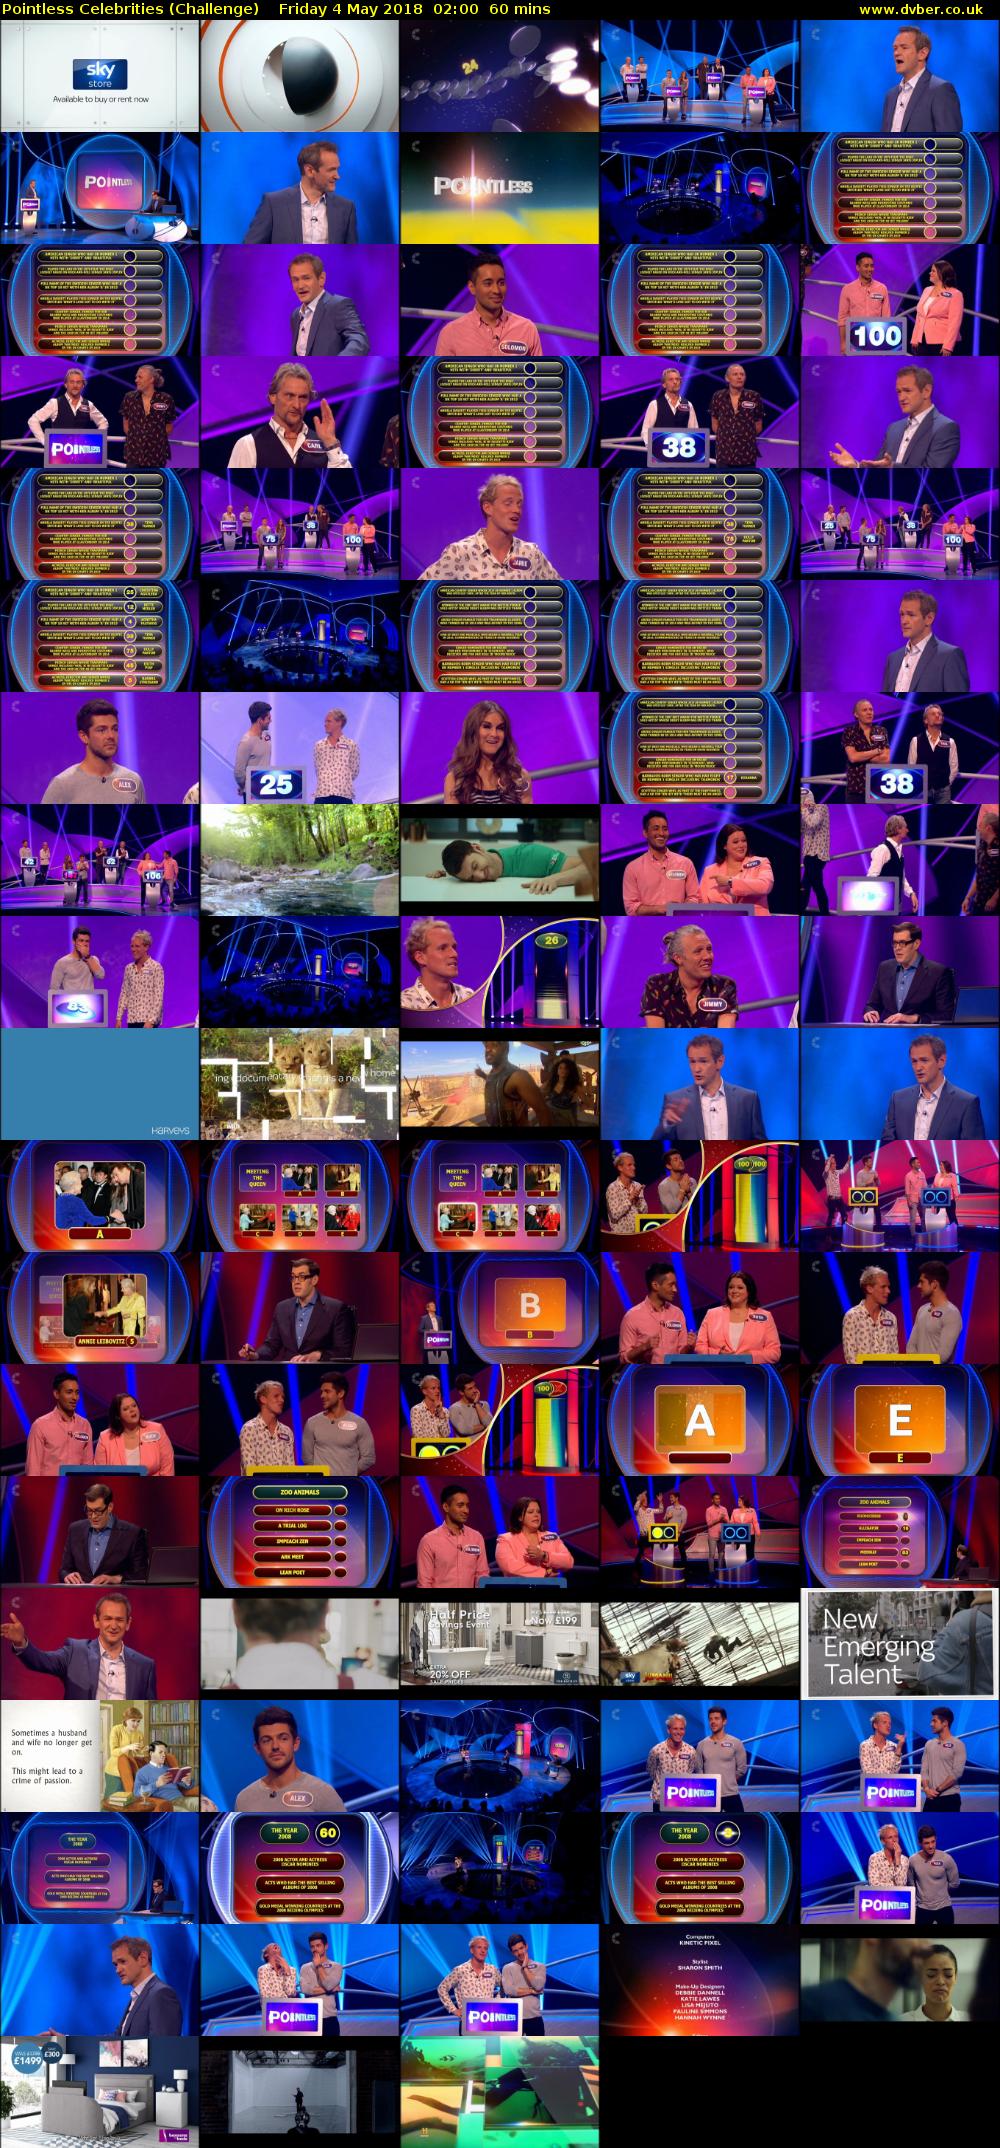 Pointless Celebrities (Challenge) Friday 4 May 2018 02:00 - 03:00